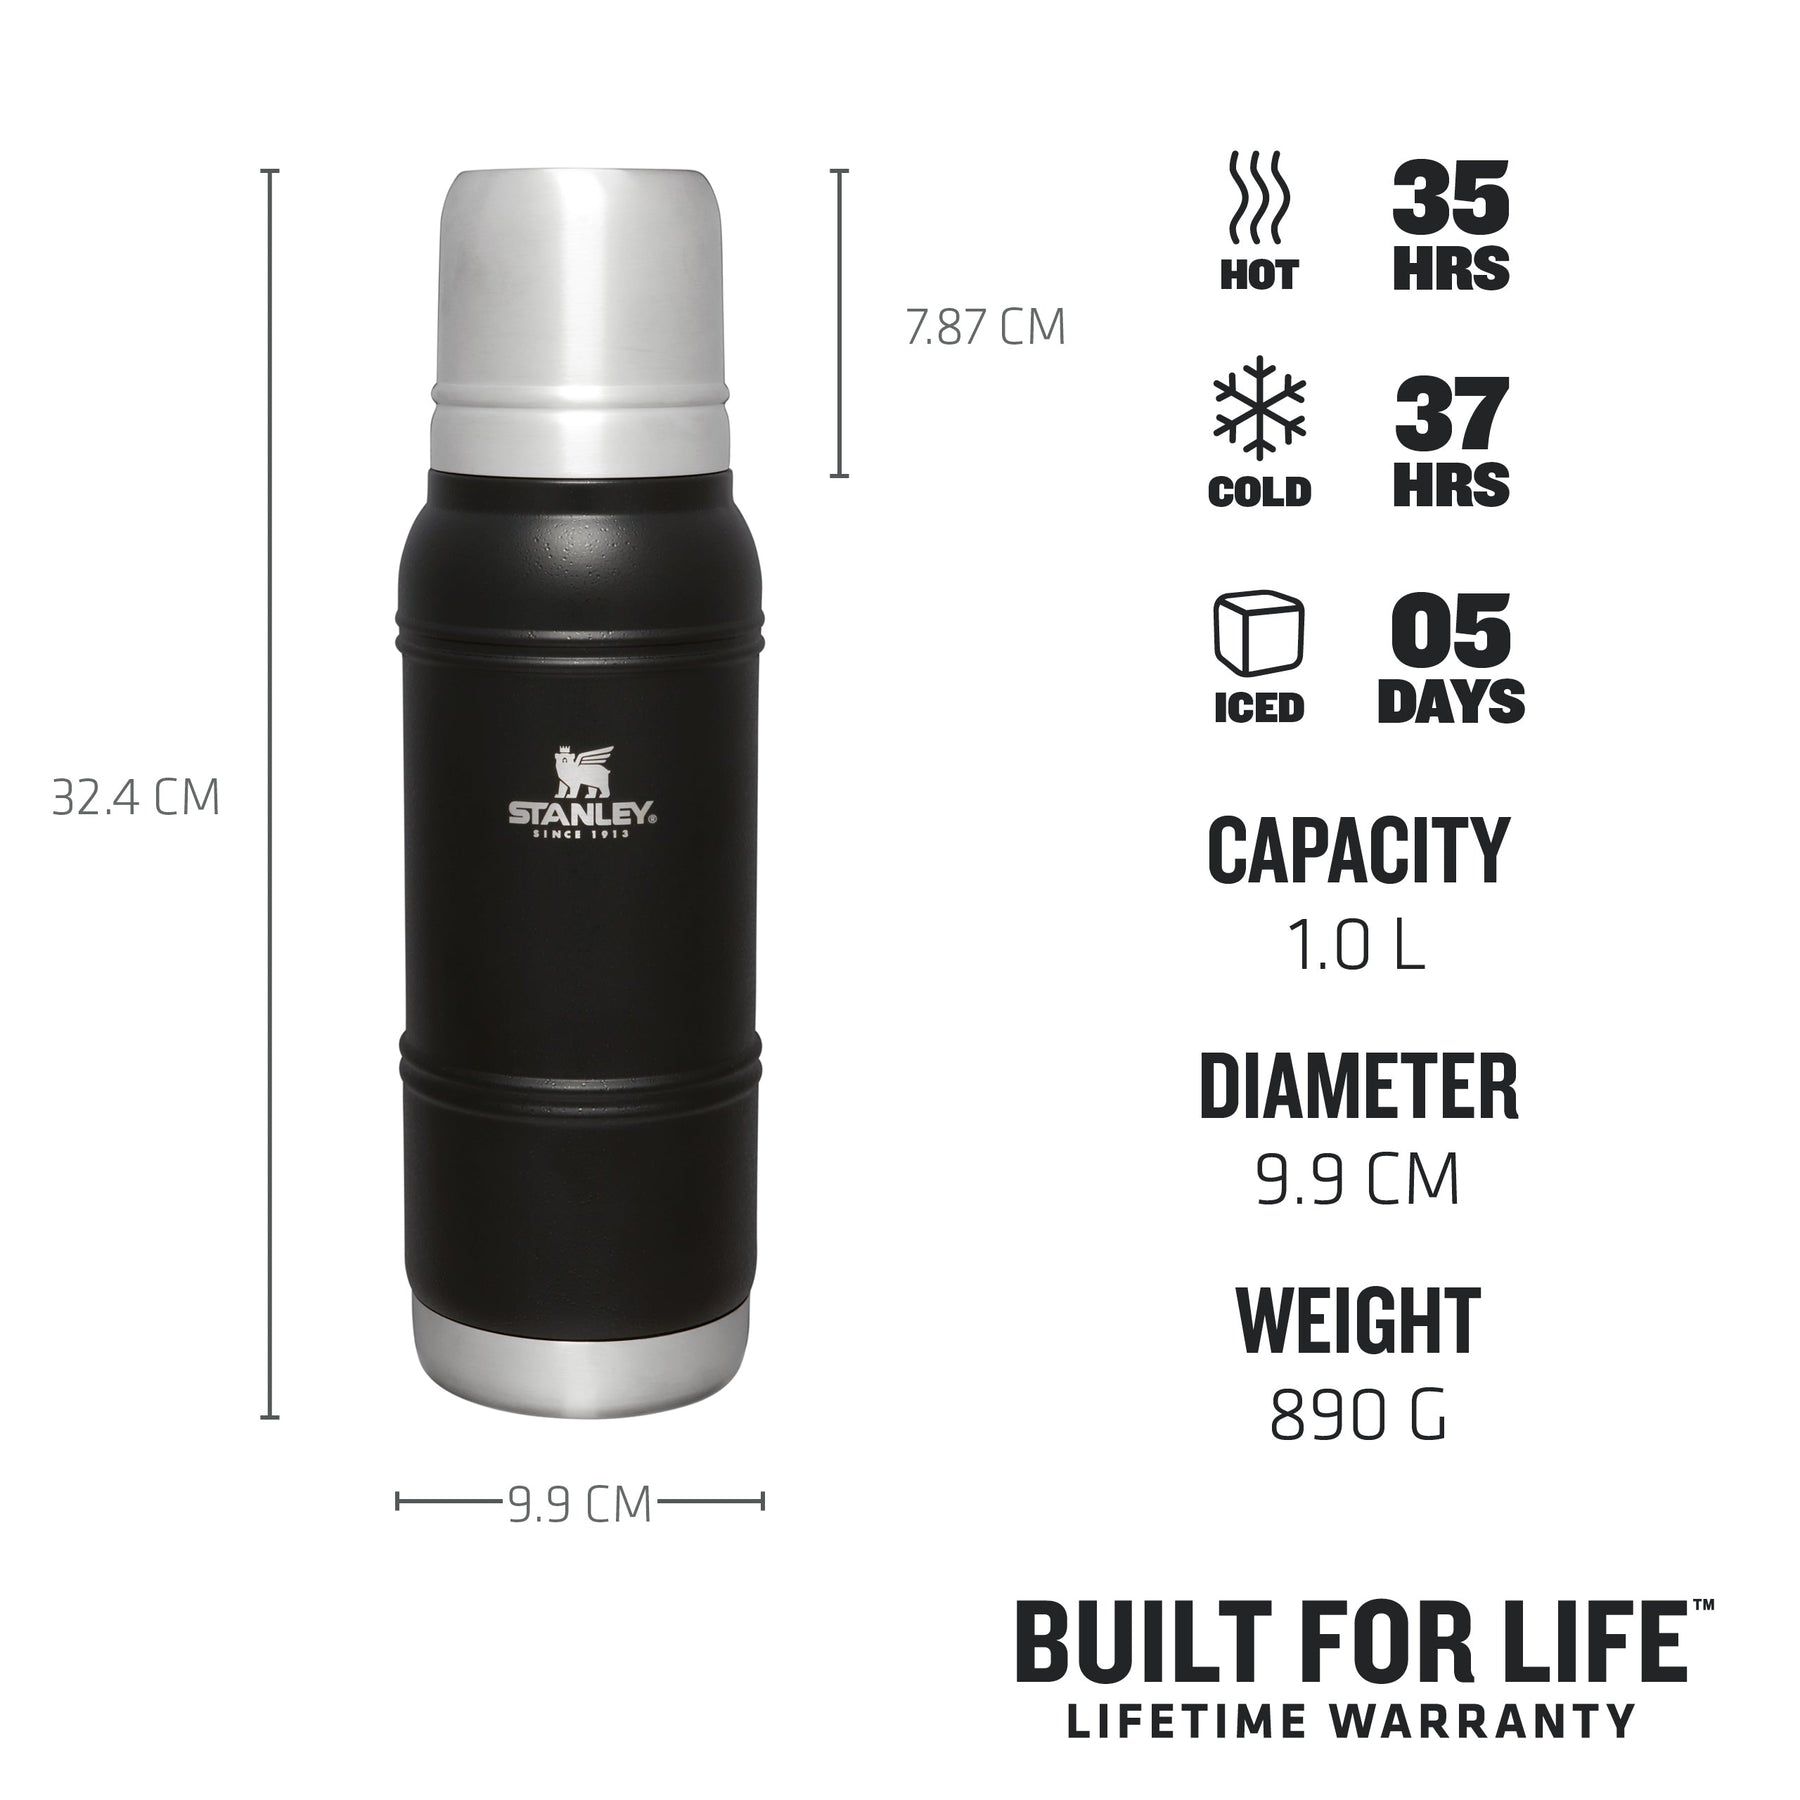 https://cdn.shopify.com/s/files/1/0516/4564/5000/products/TheArtisanThermalBottle1.0L-1.1QT-BlackMoon-USPs_Thermals_1800x1800.jpg?v=1699055804